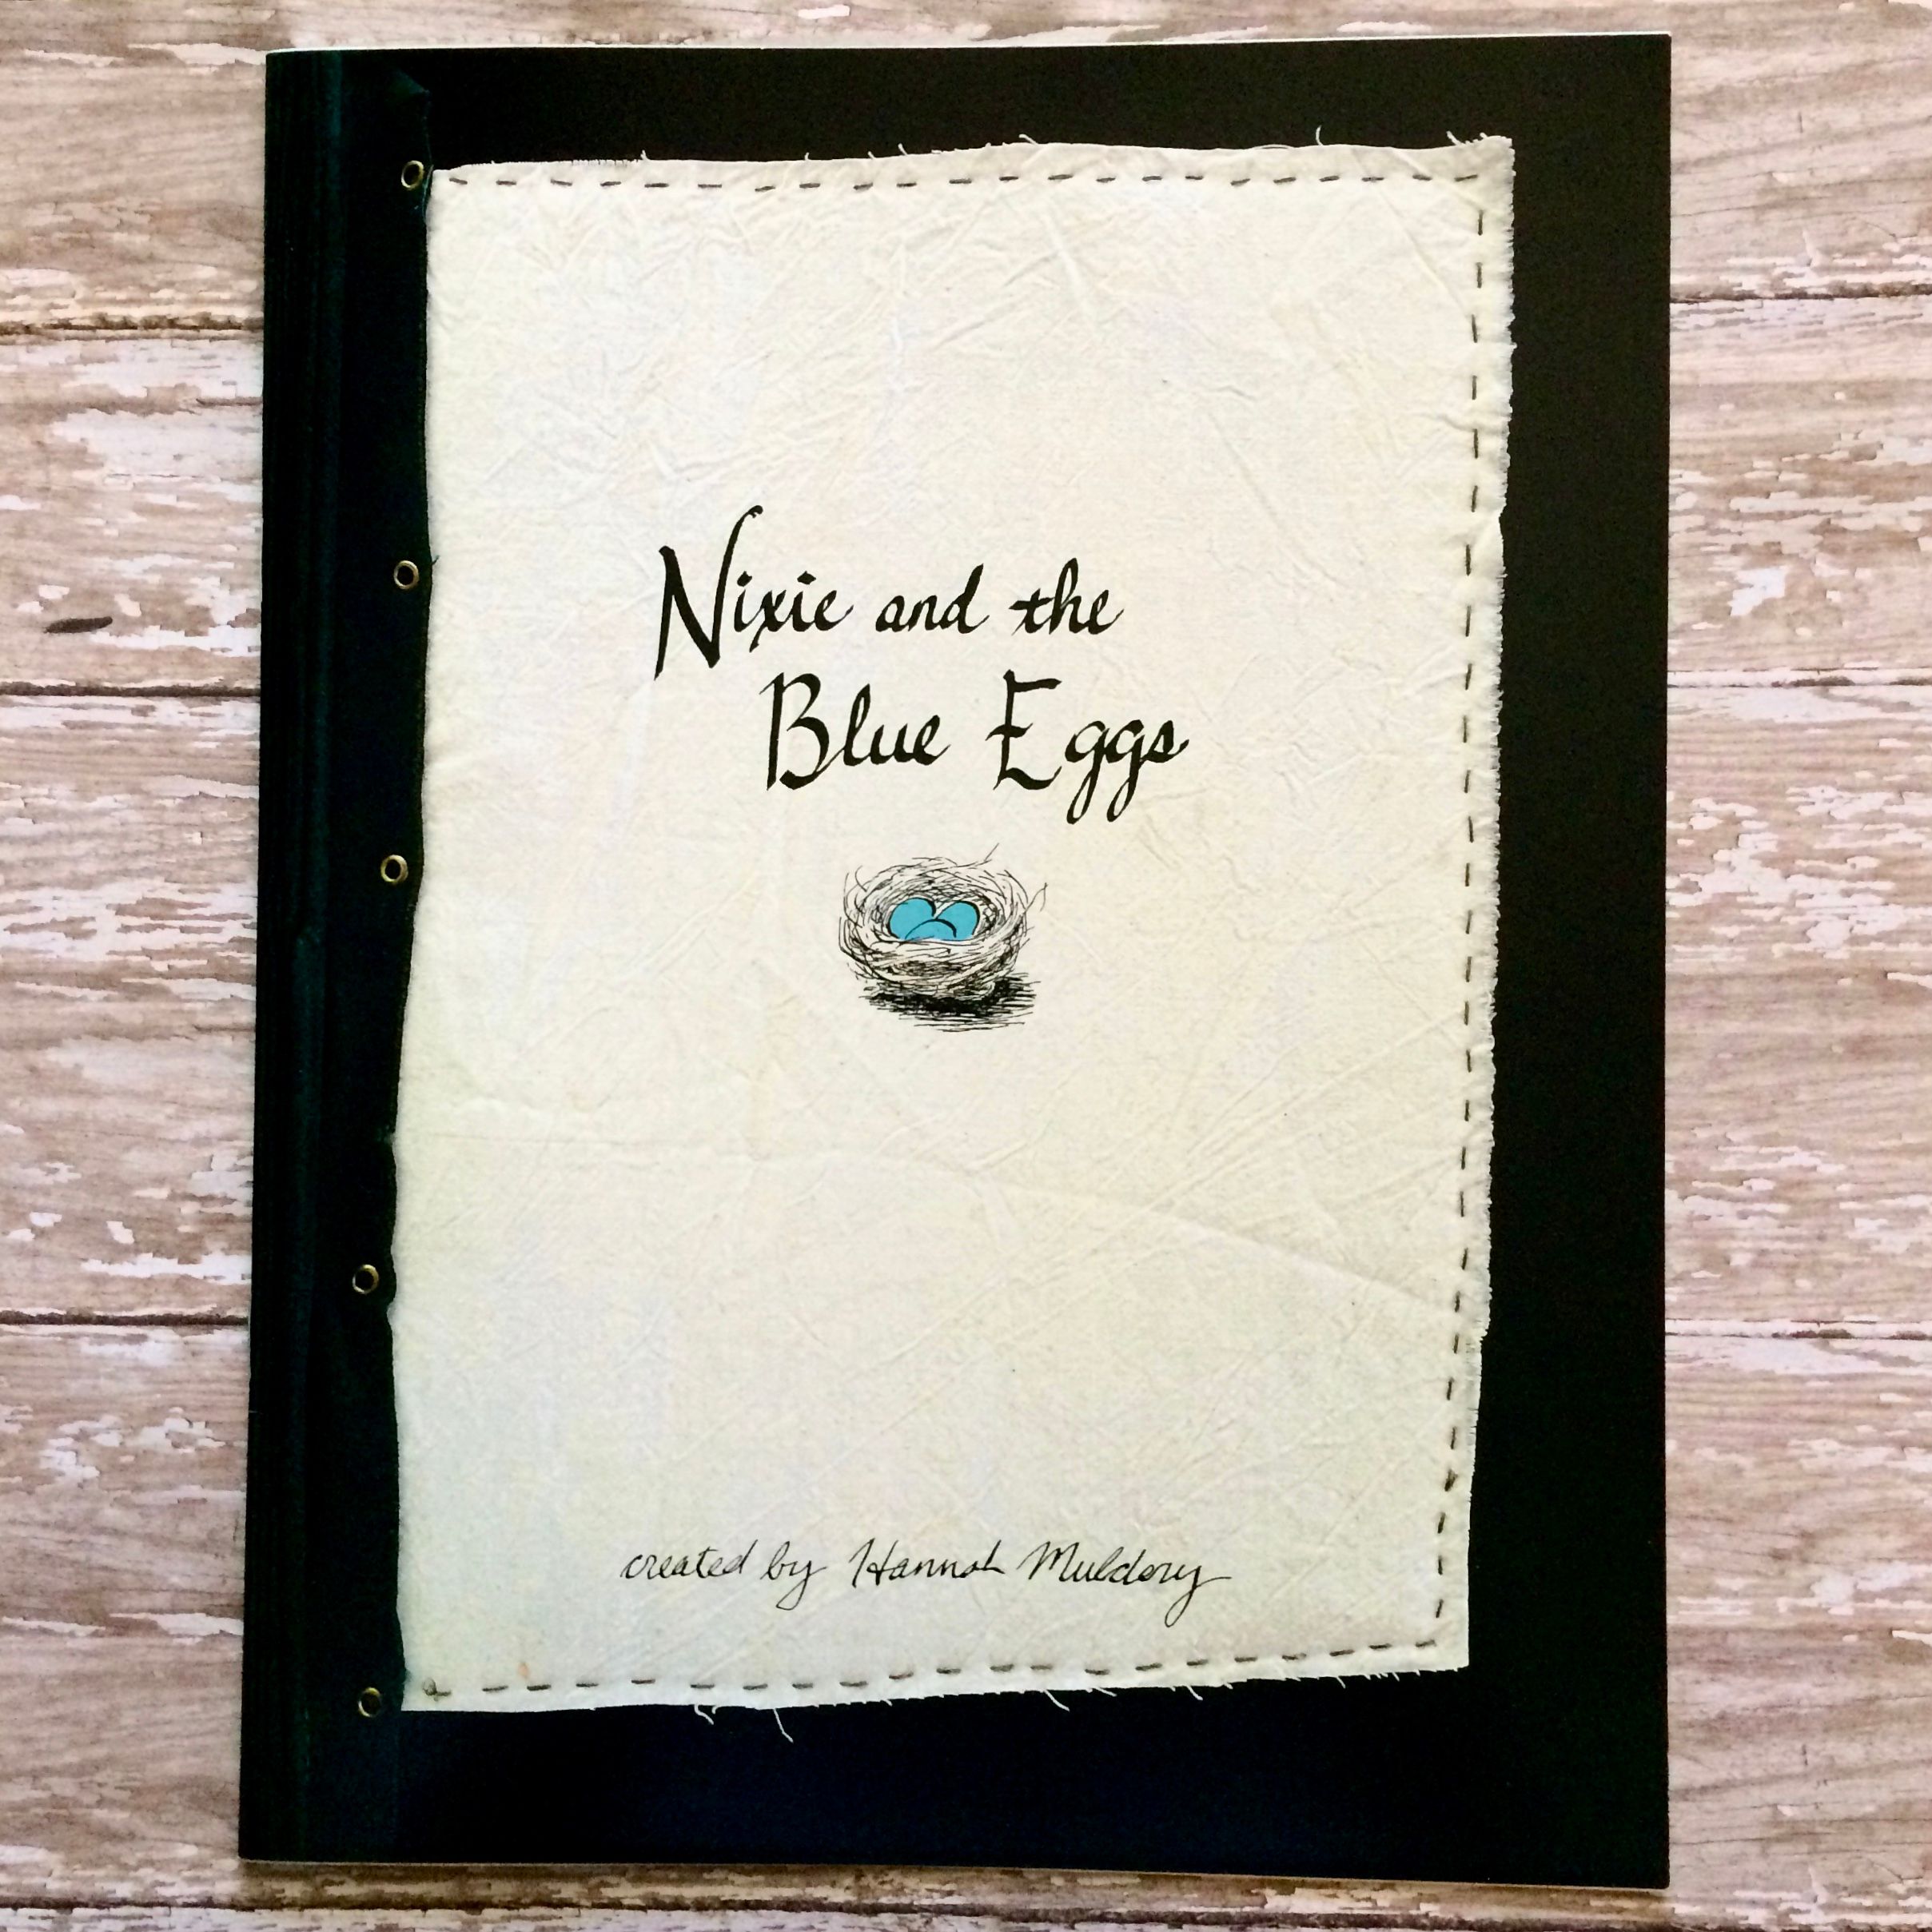 "Nixie and the Blue Eggs" Artist Book Short Story Image